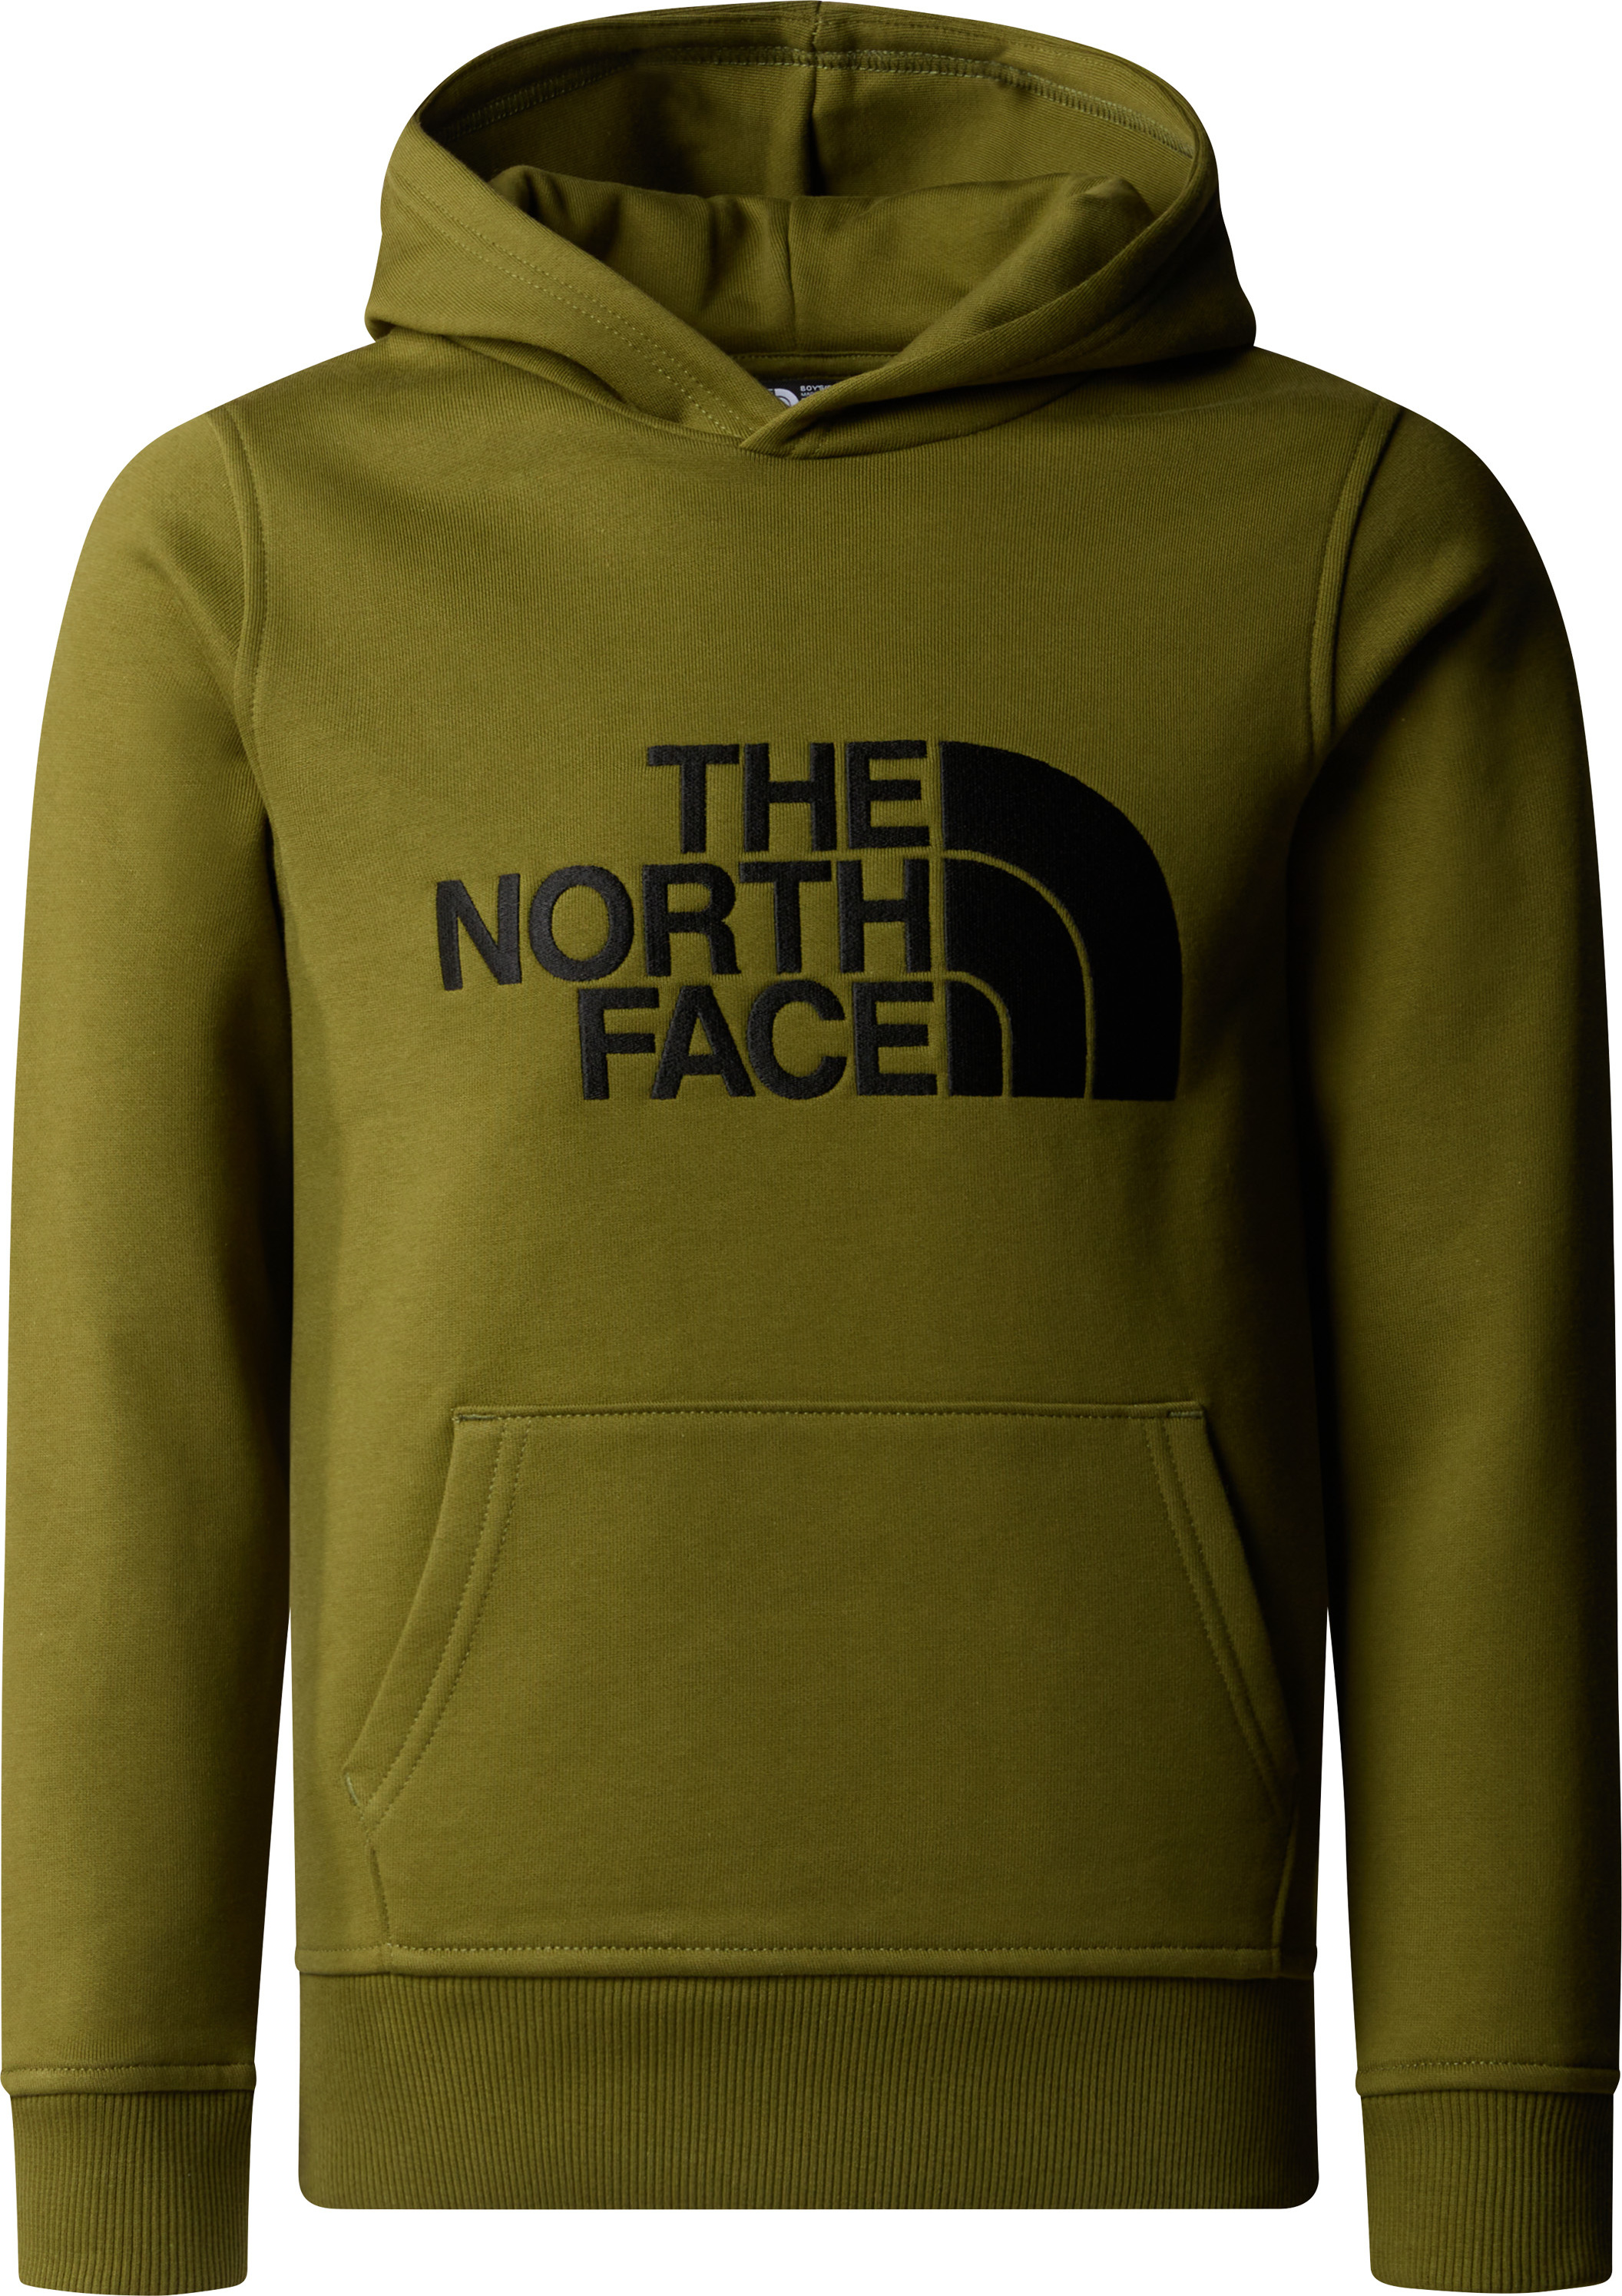 The North Face B Drew Peak P/O Hoodie Forest Olive